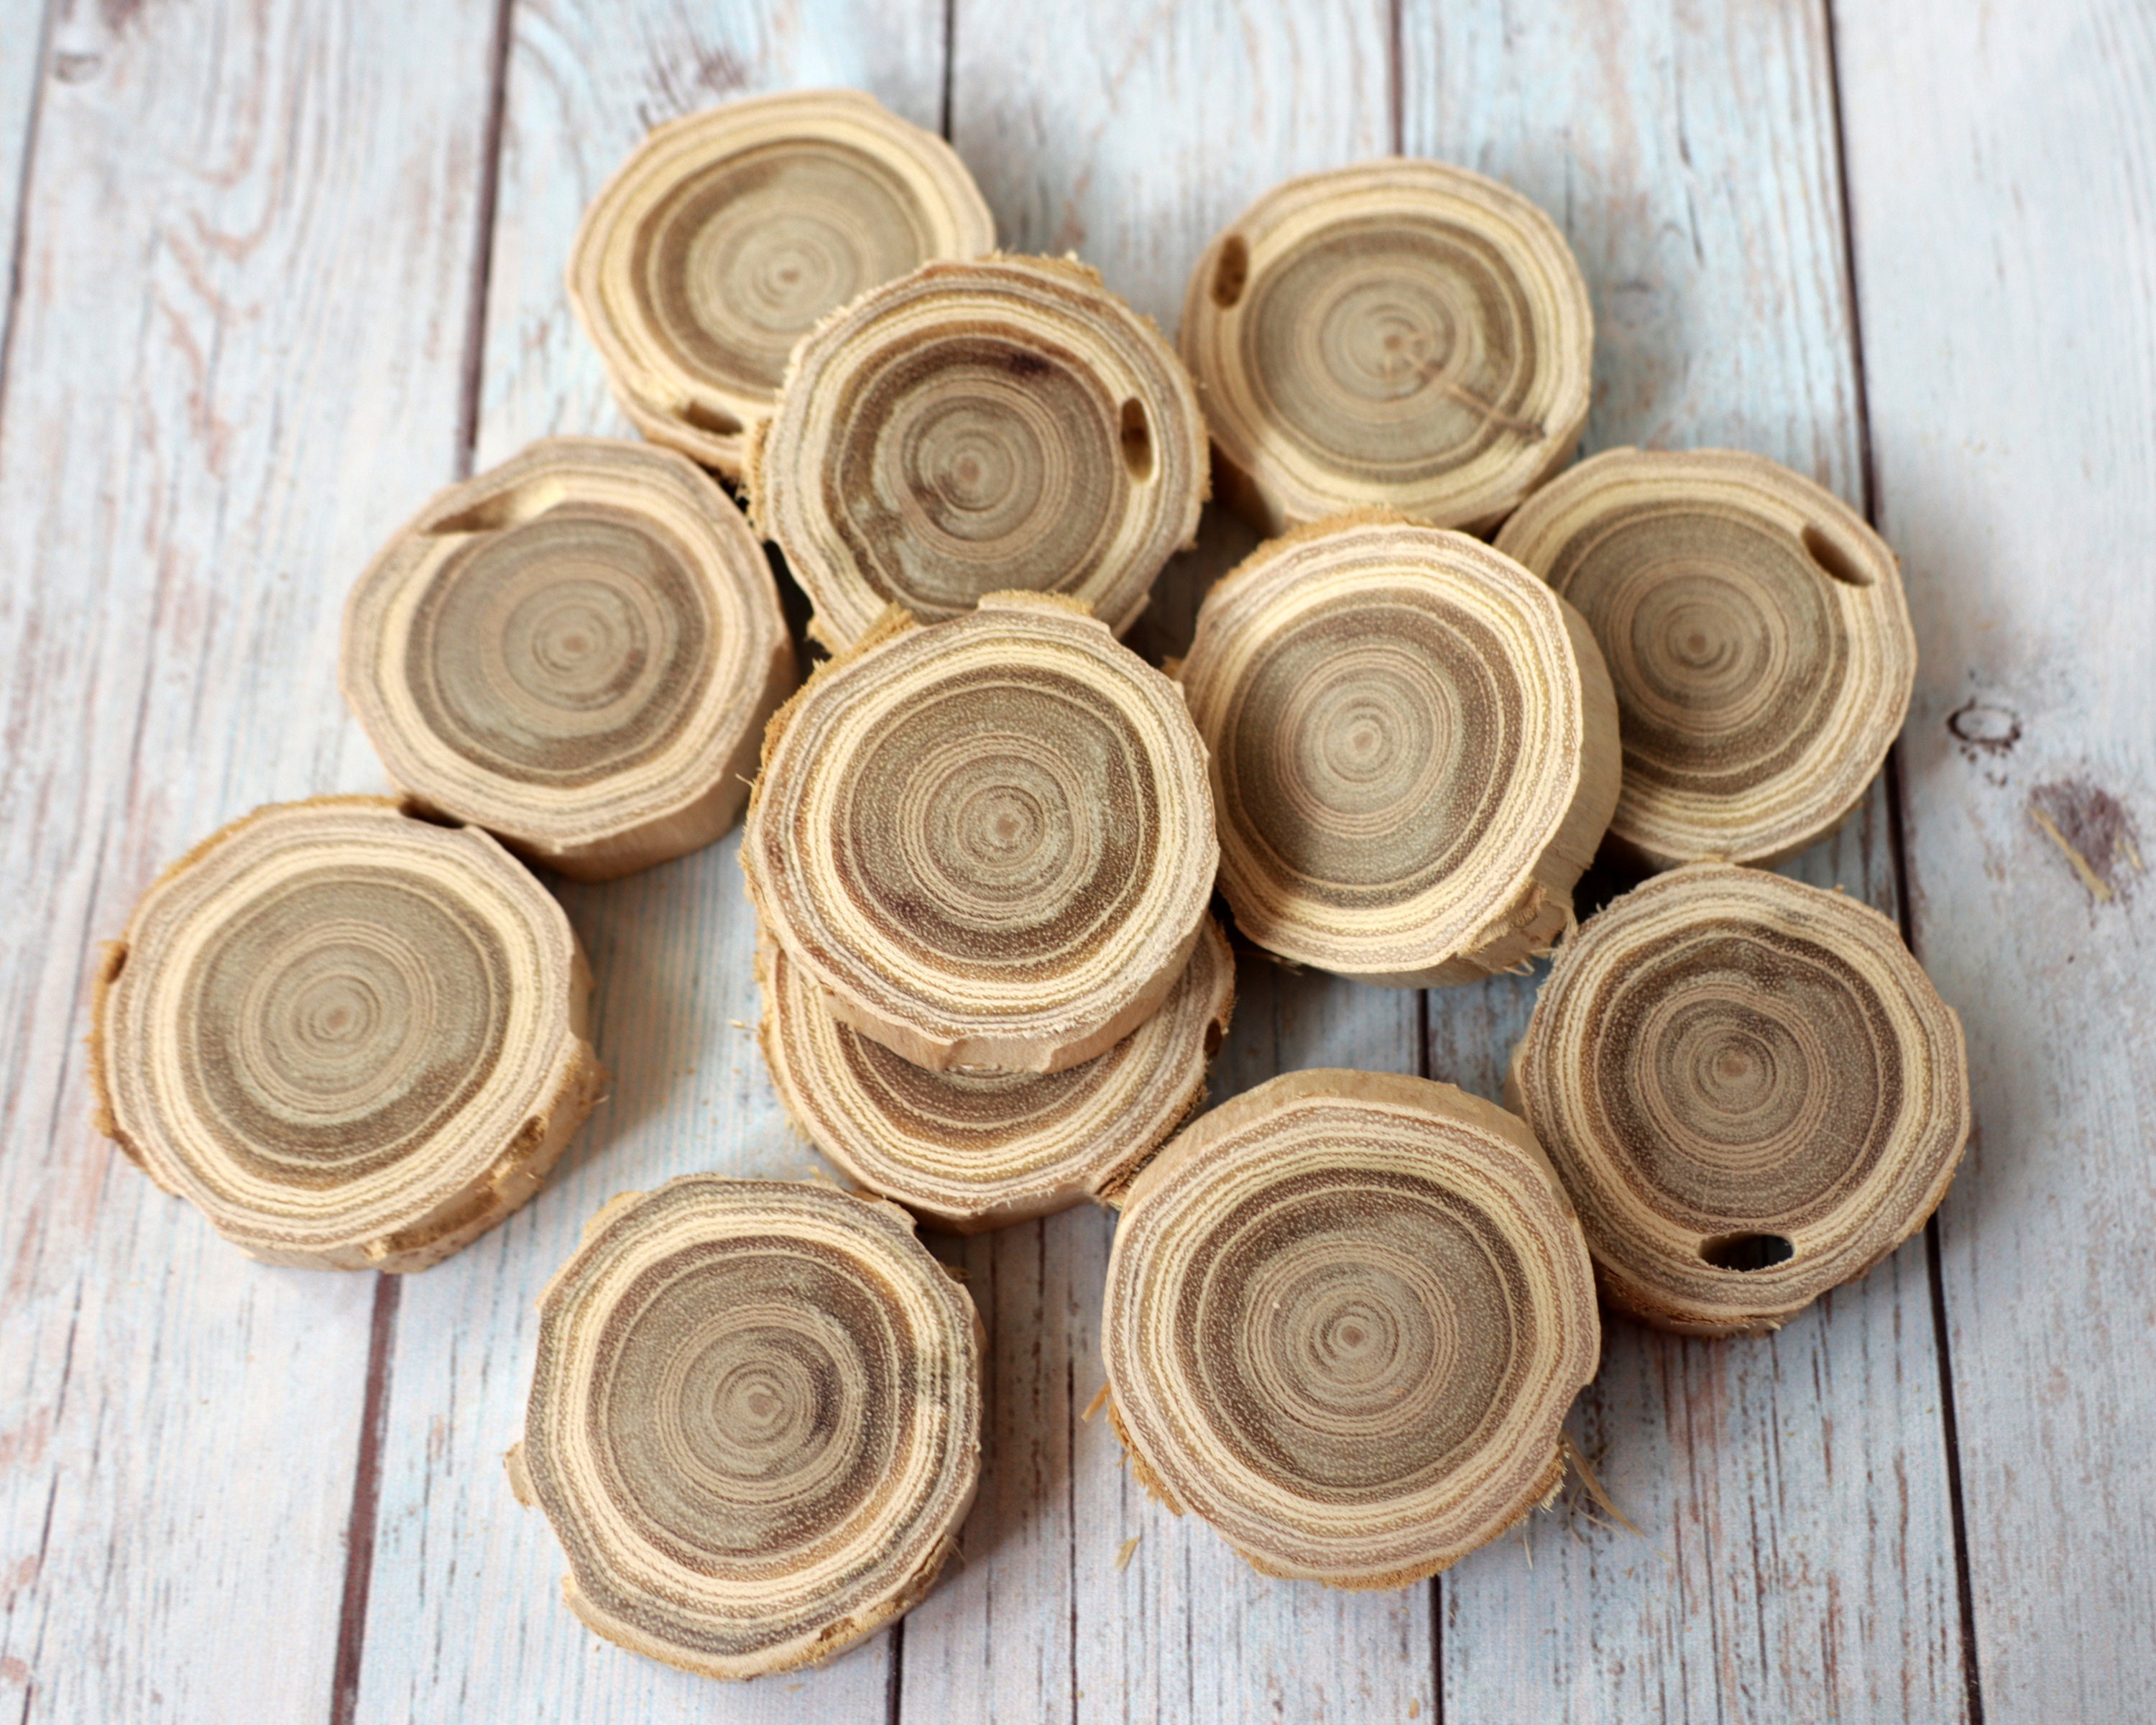 Natural Pine Wood Rounds Unfinished Wood Slices With Bark Log